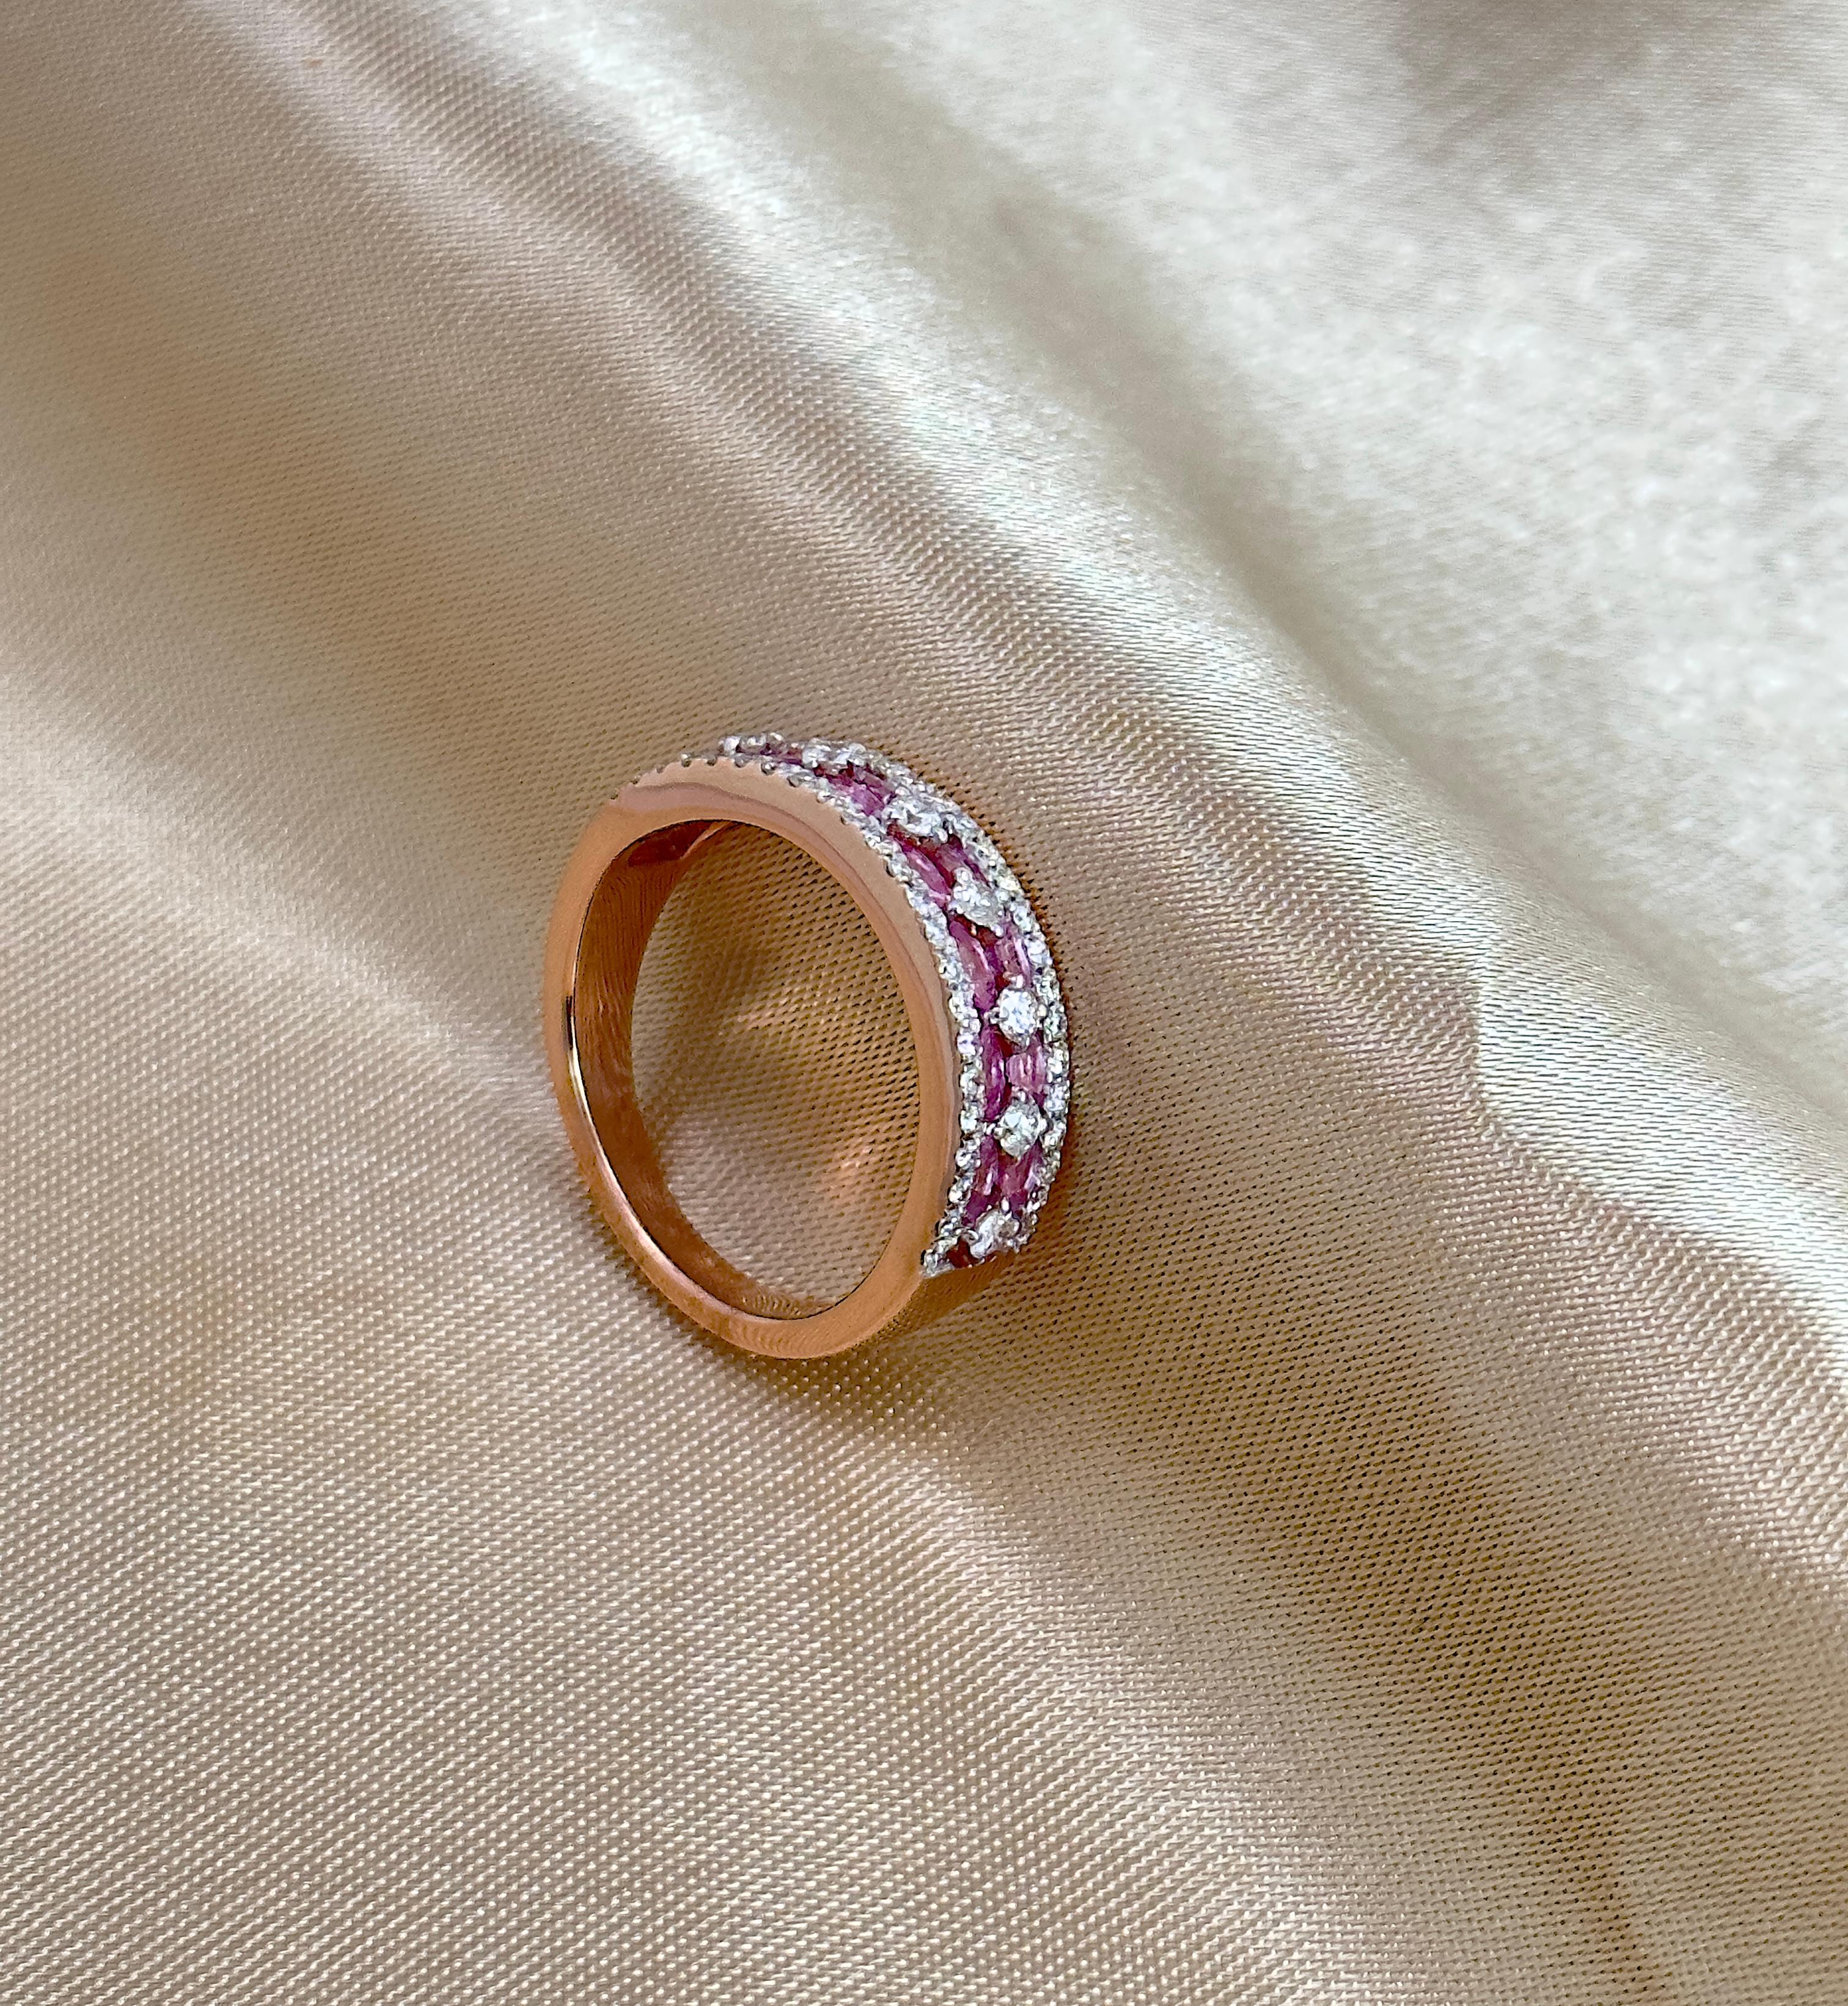 Pink Sapphire and Diamond Half Band with Natural Gemstones, Minimalist Ring 14k For Sale 3